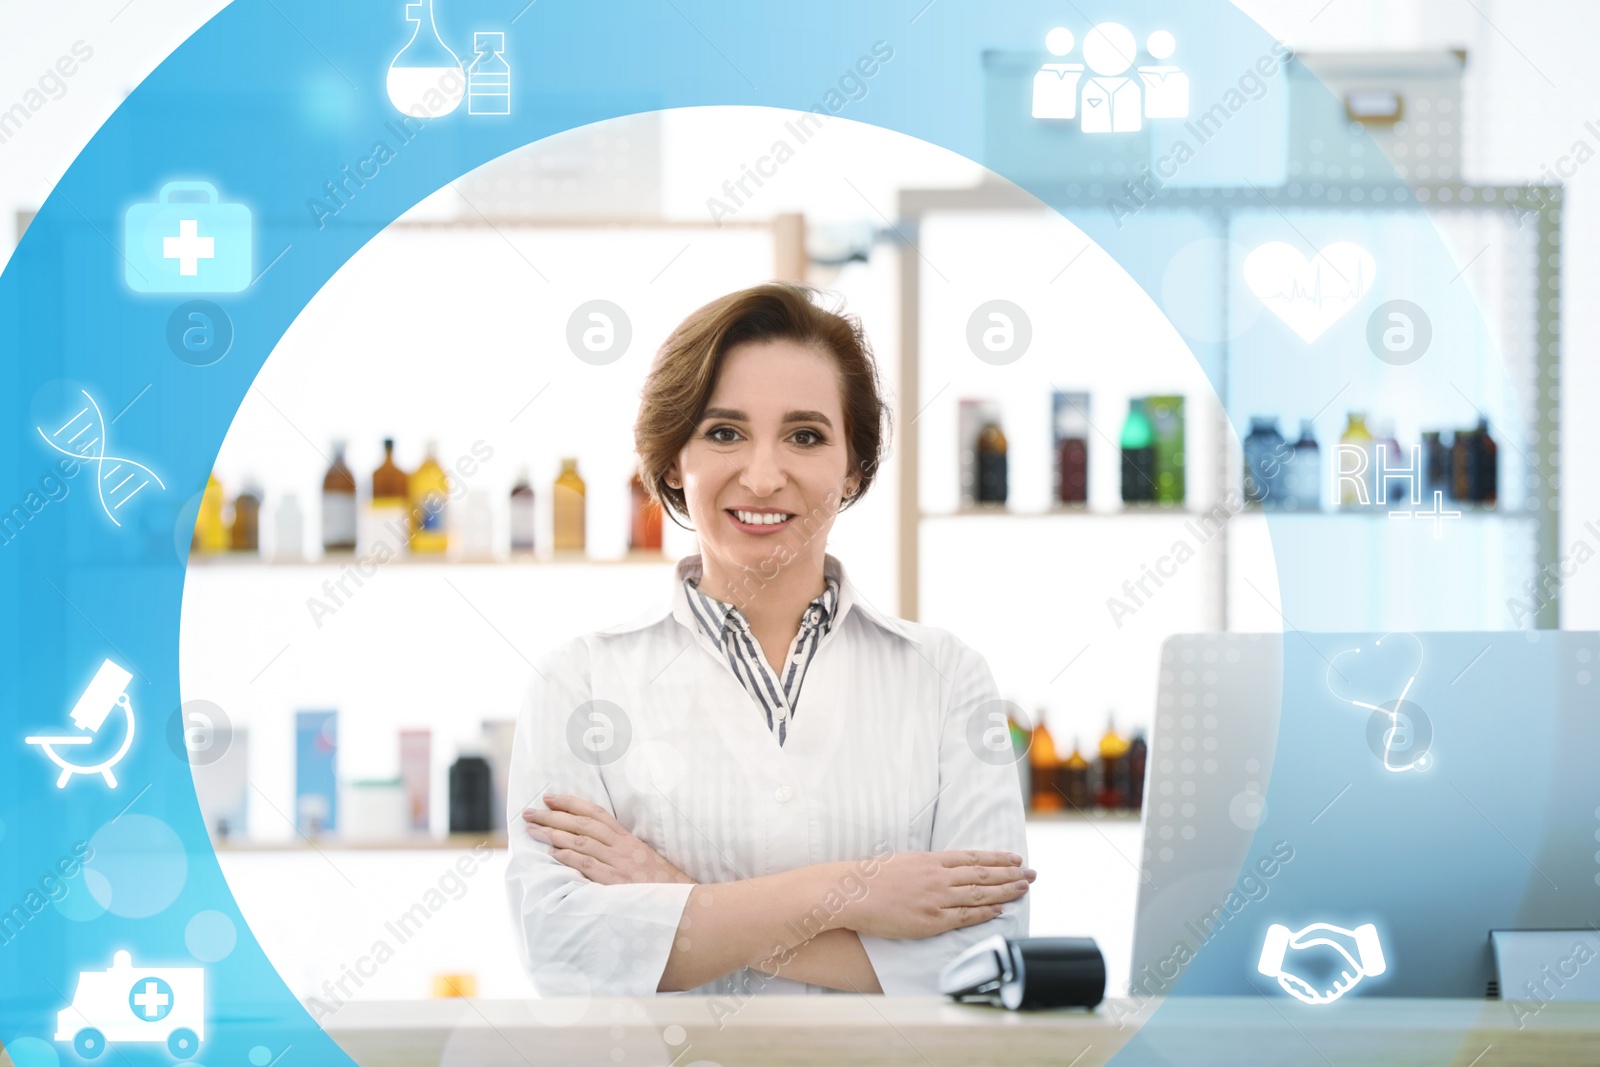 Image of Virtual icons and professional pharmacist in drugstore